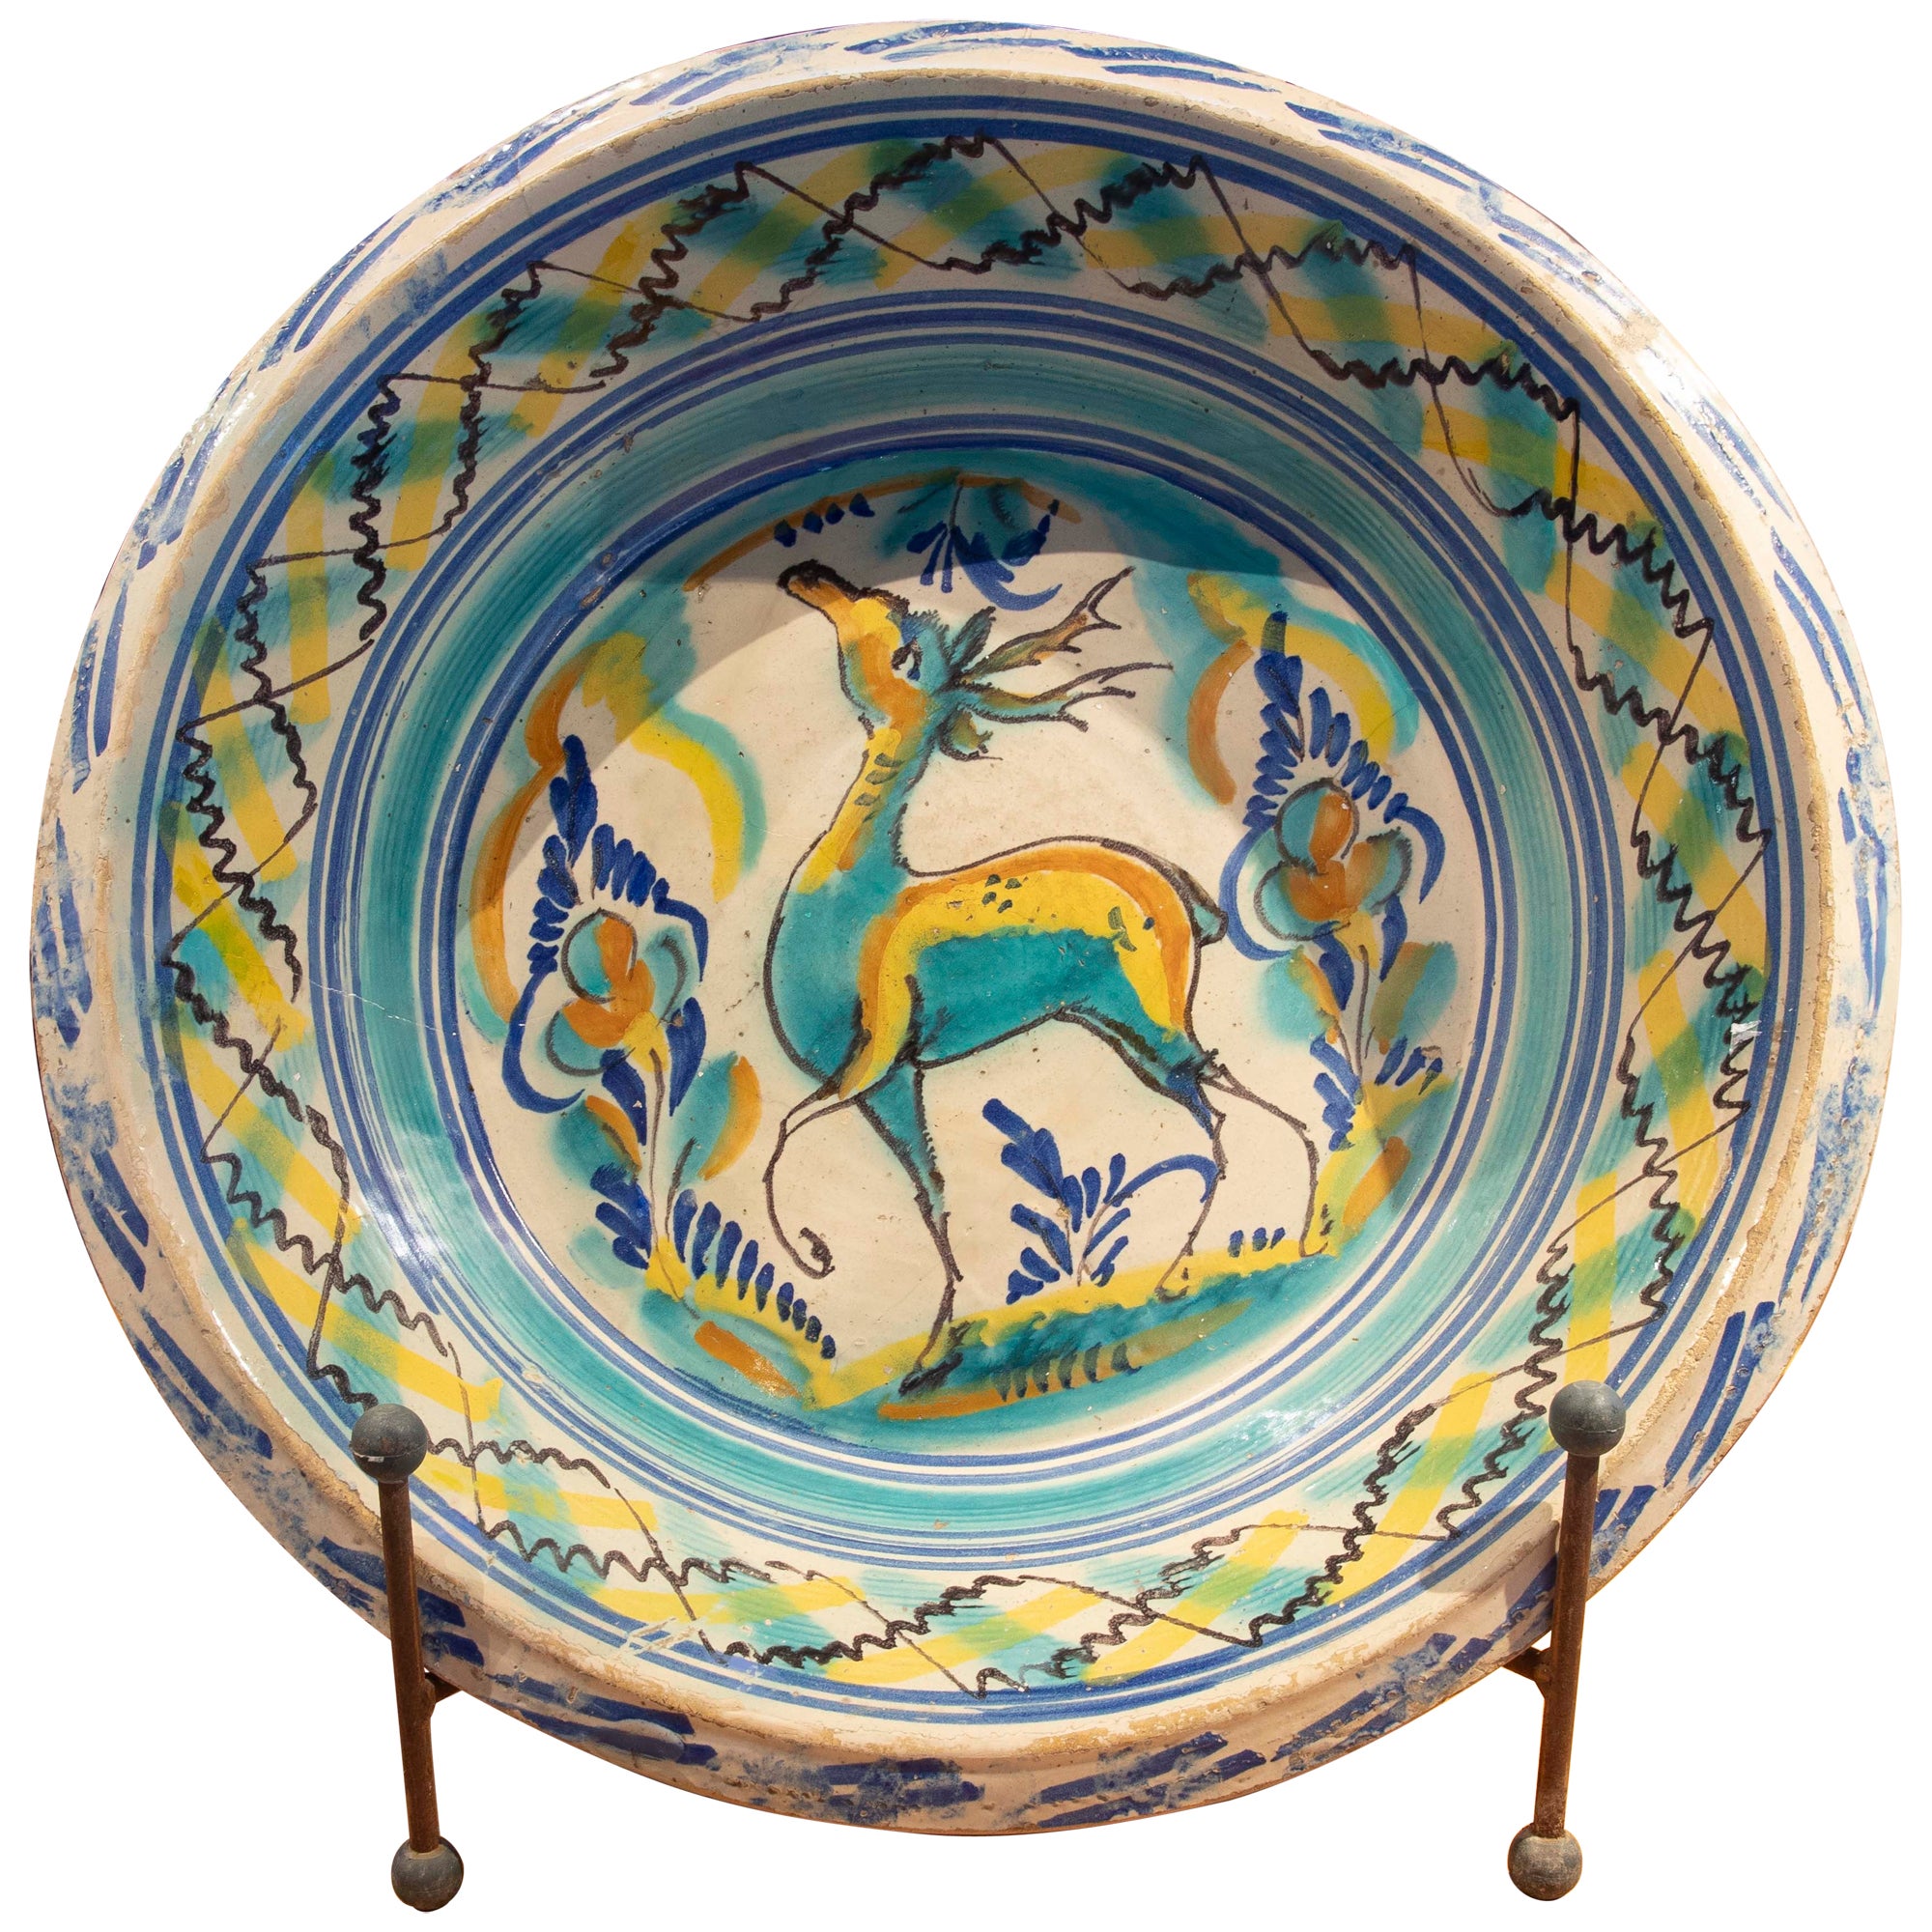 19th Century Spanish Triana "Lebrillo" Ceramic Plate with Painted Deer For Sale